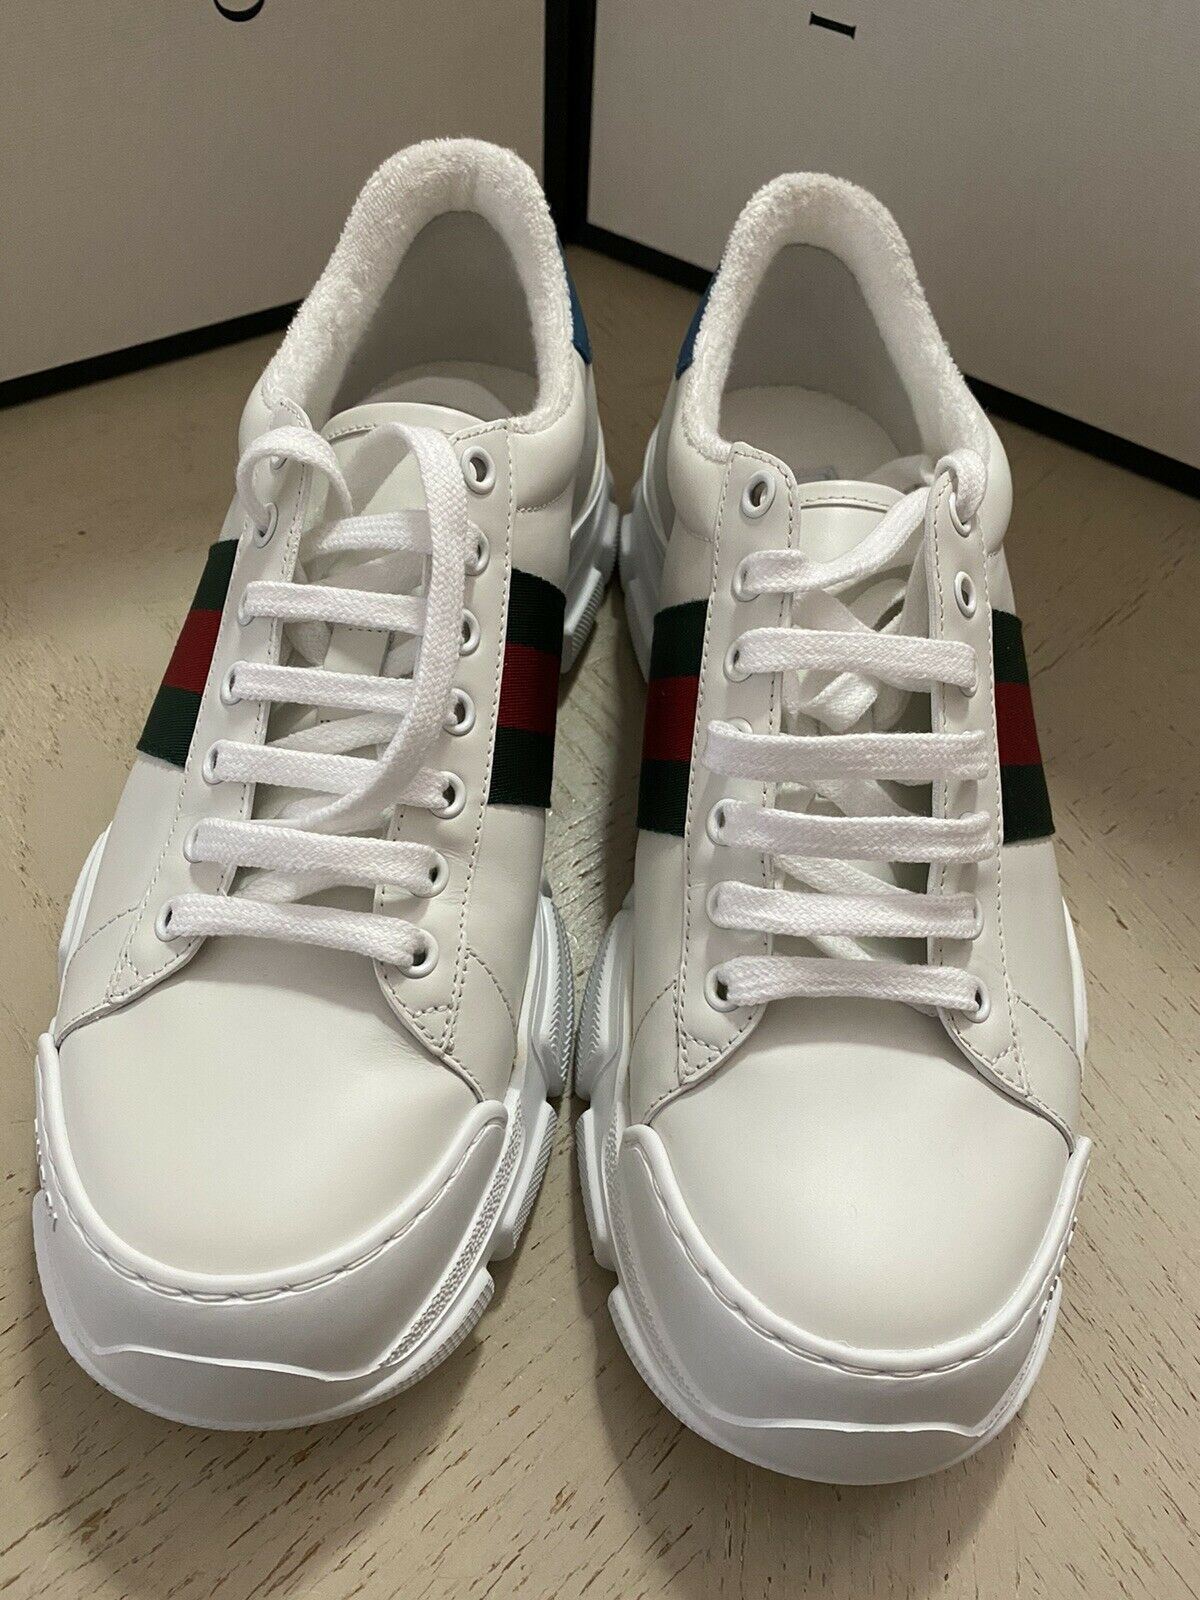 New Gucci Men’s Leather Sneakers Shoes White 9 US ( 8 UK ) 624701